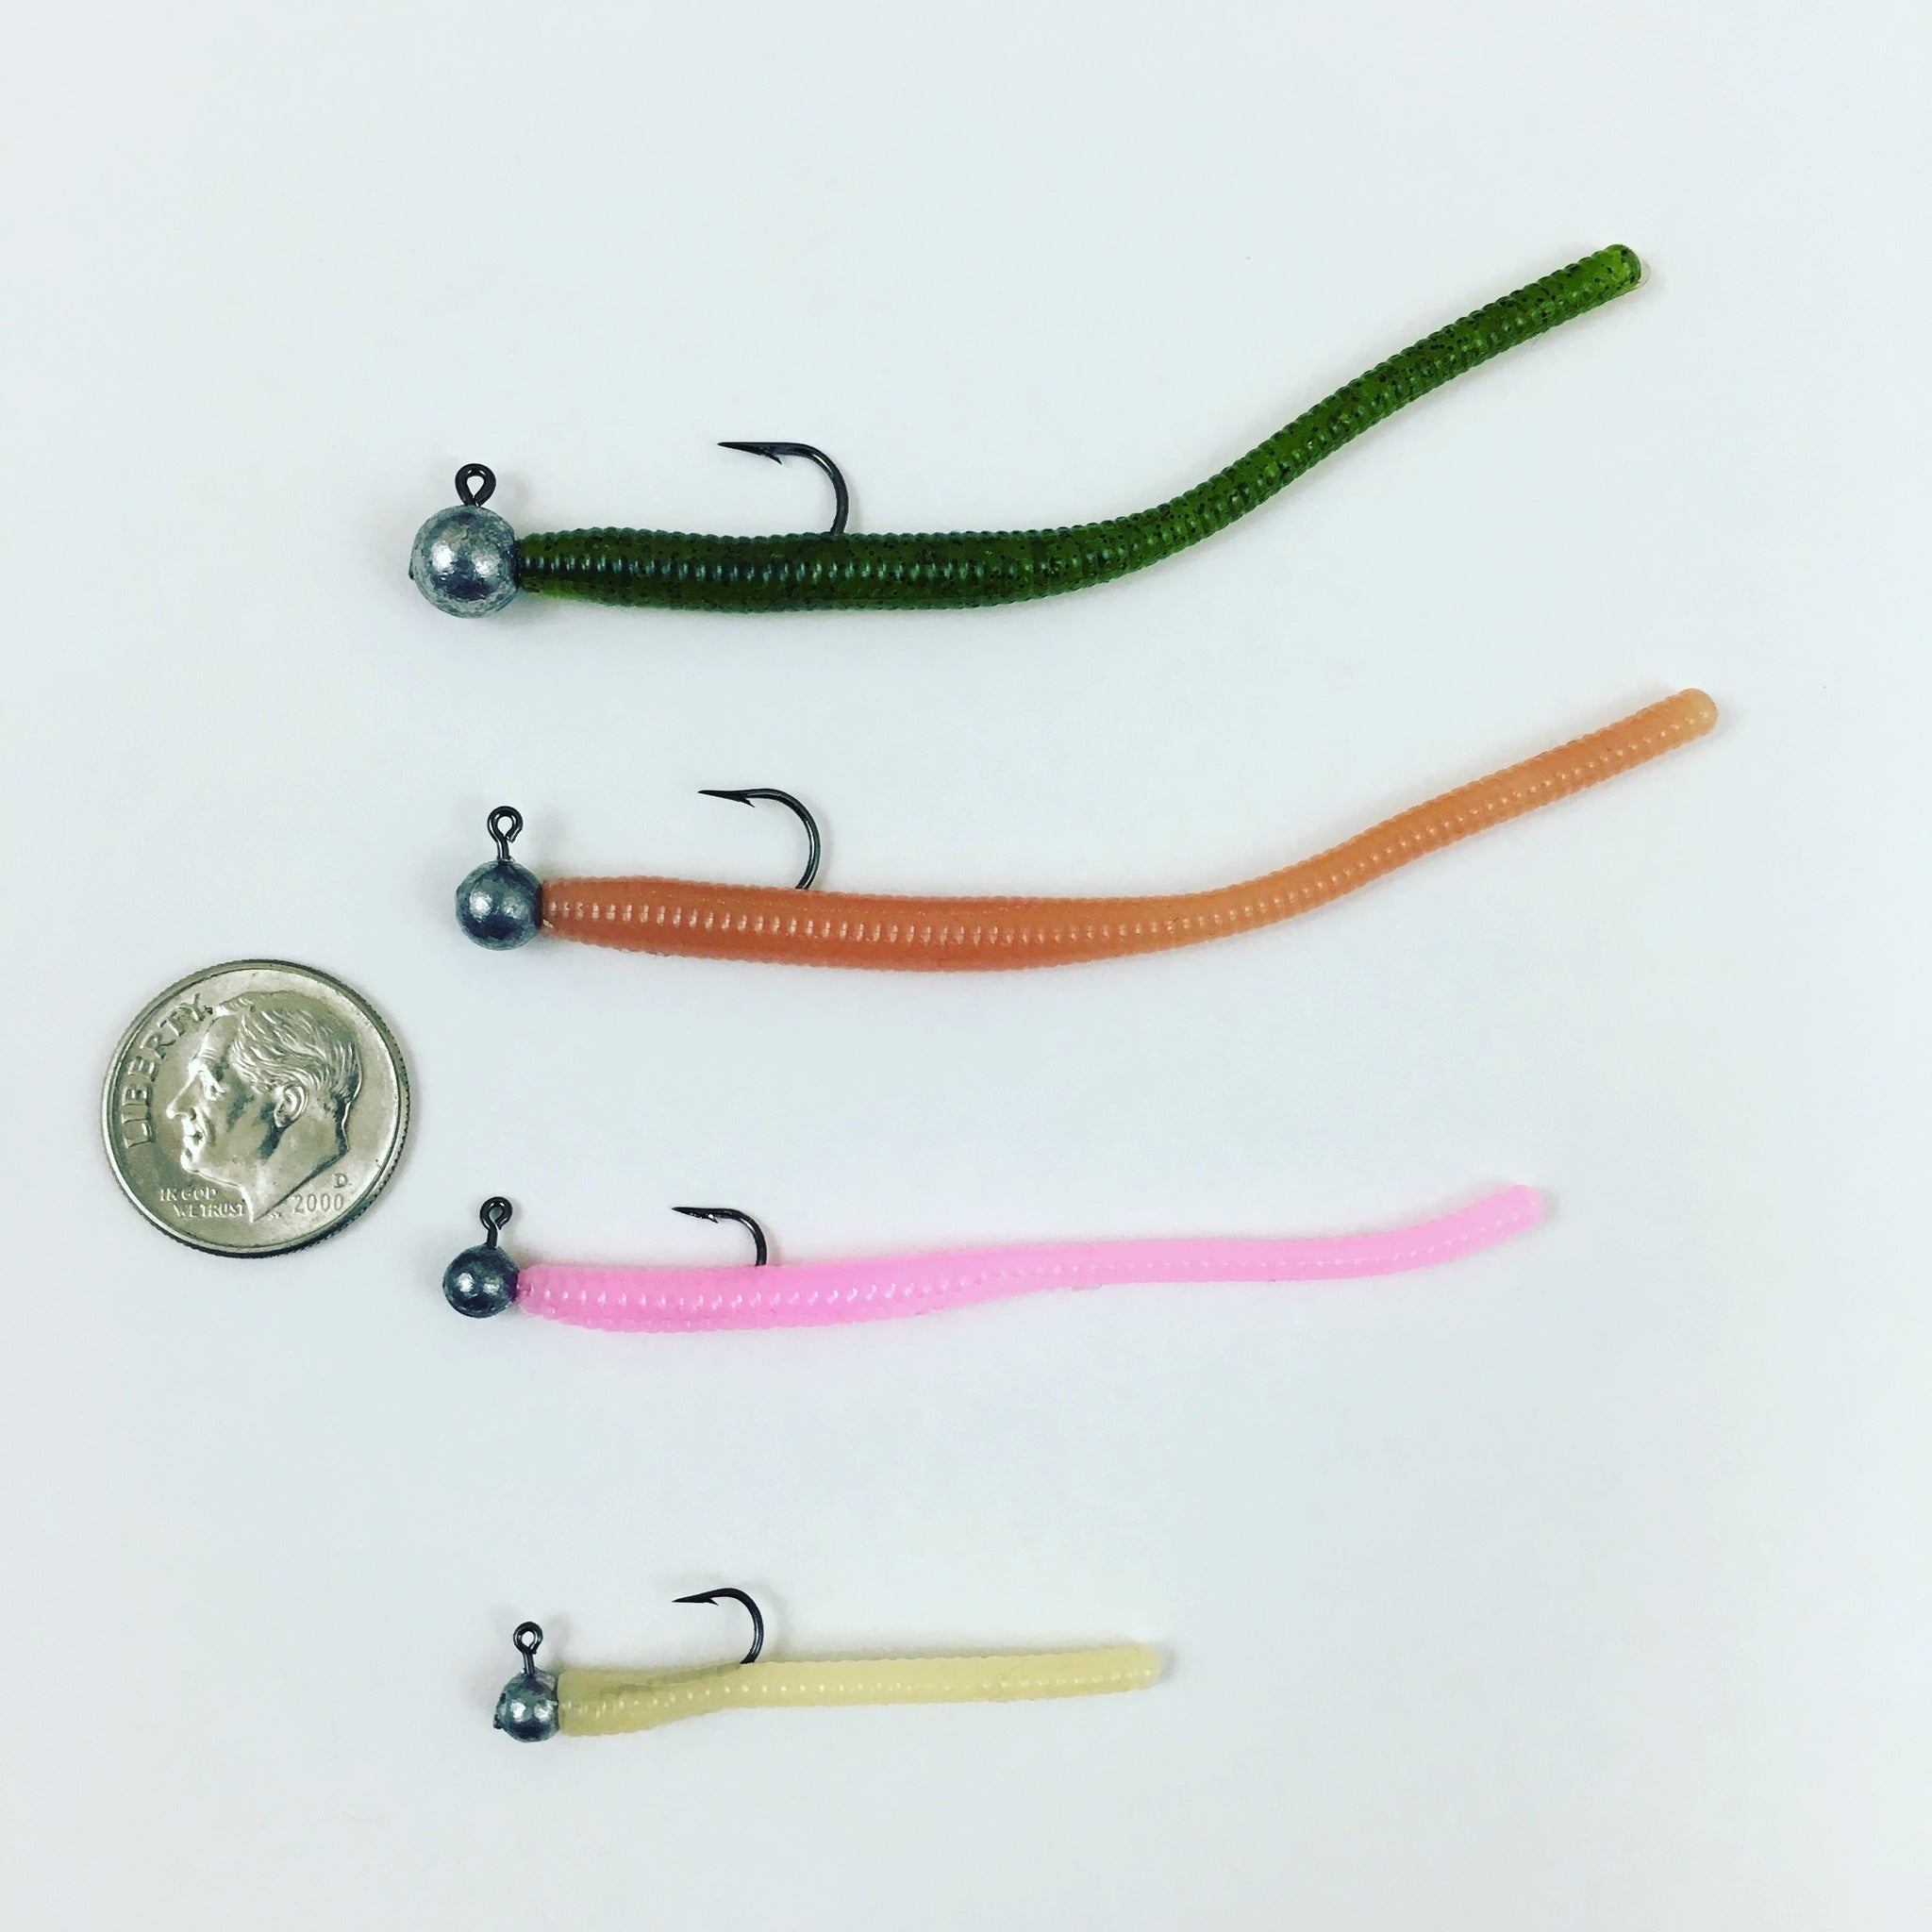 Super Floating Trout Worm: Electric Rainbow Trout